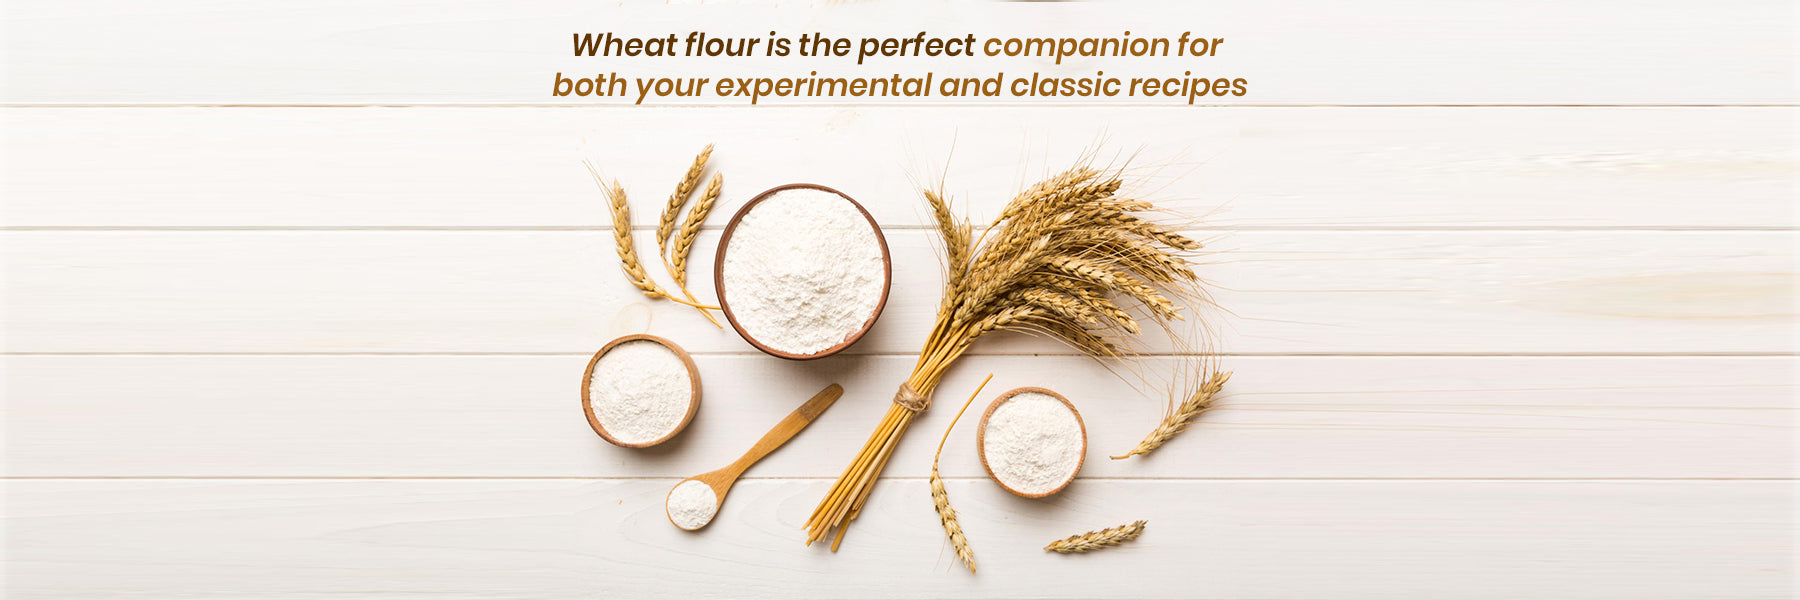 Wheat flour is the perfect companion for both your experimental and classic recipes FromIndia.com